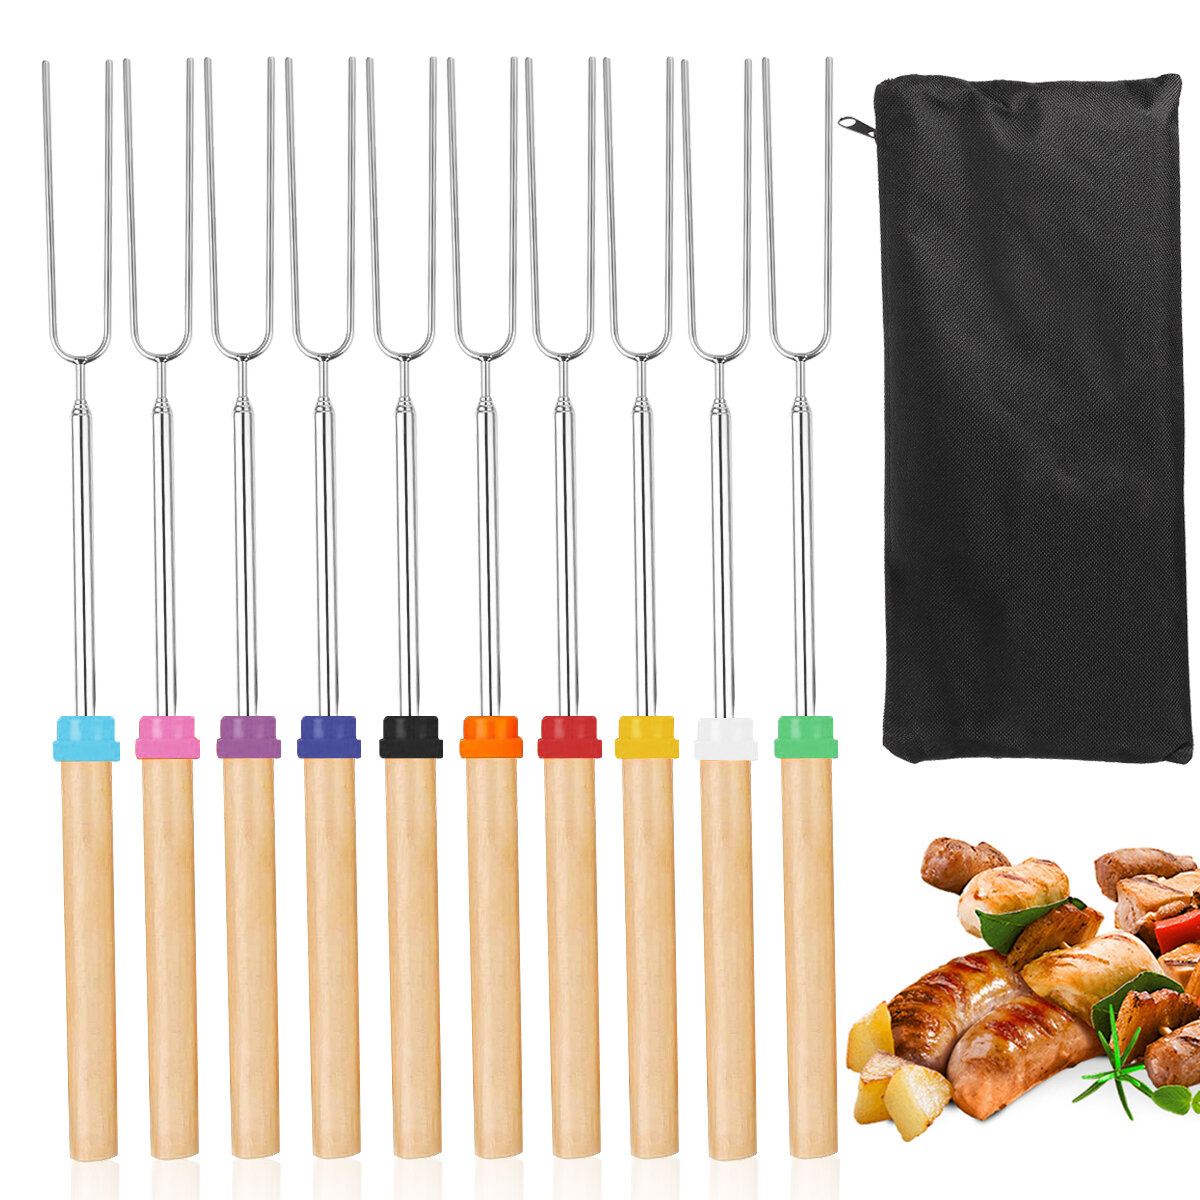 10x Wooden Handle Stainless Steel Meat Fork Barbecue Skewers Needle For Picnic 